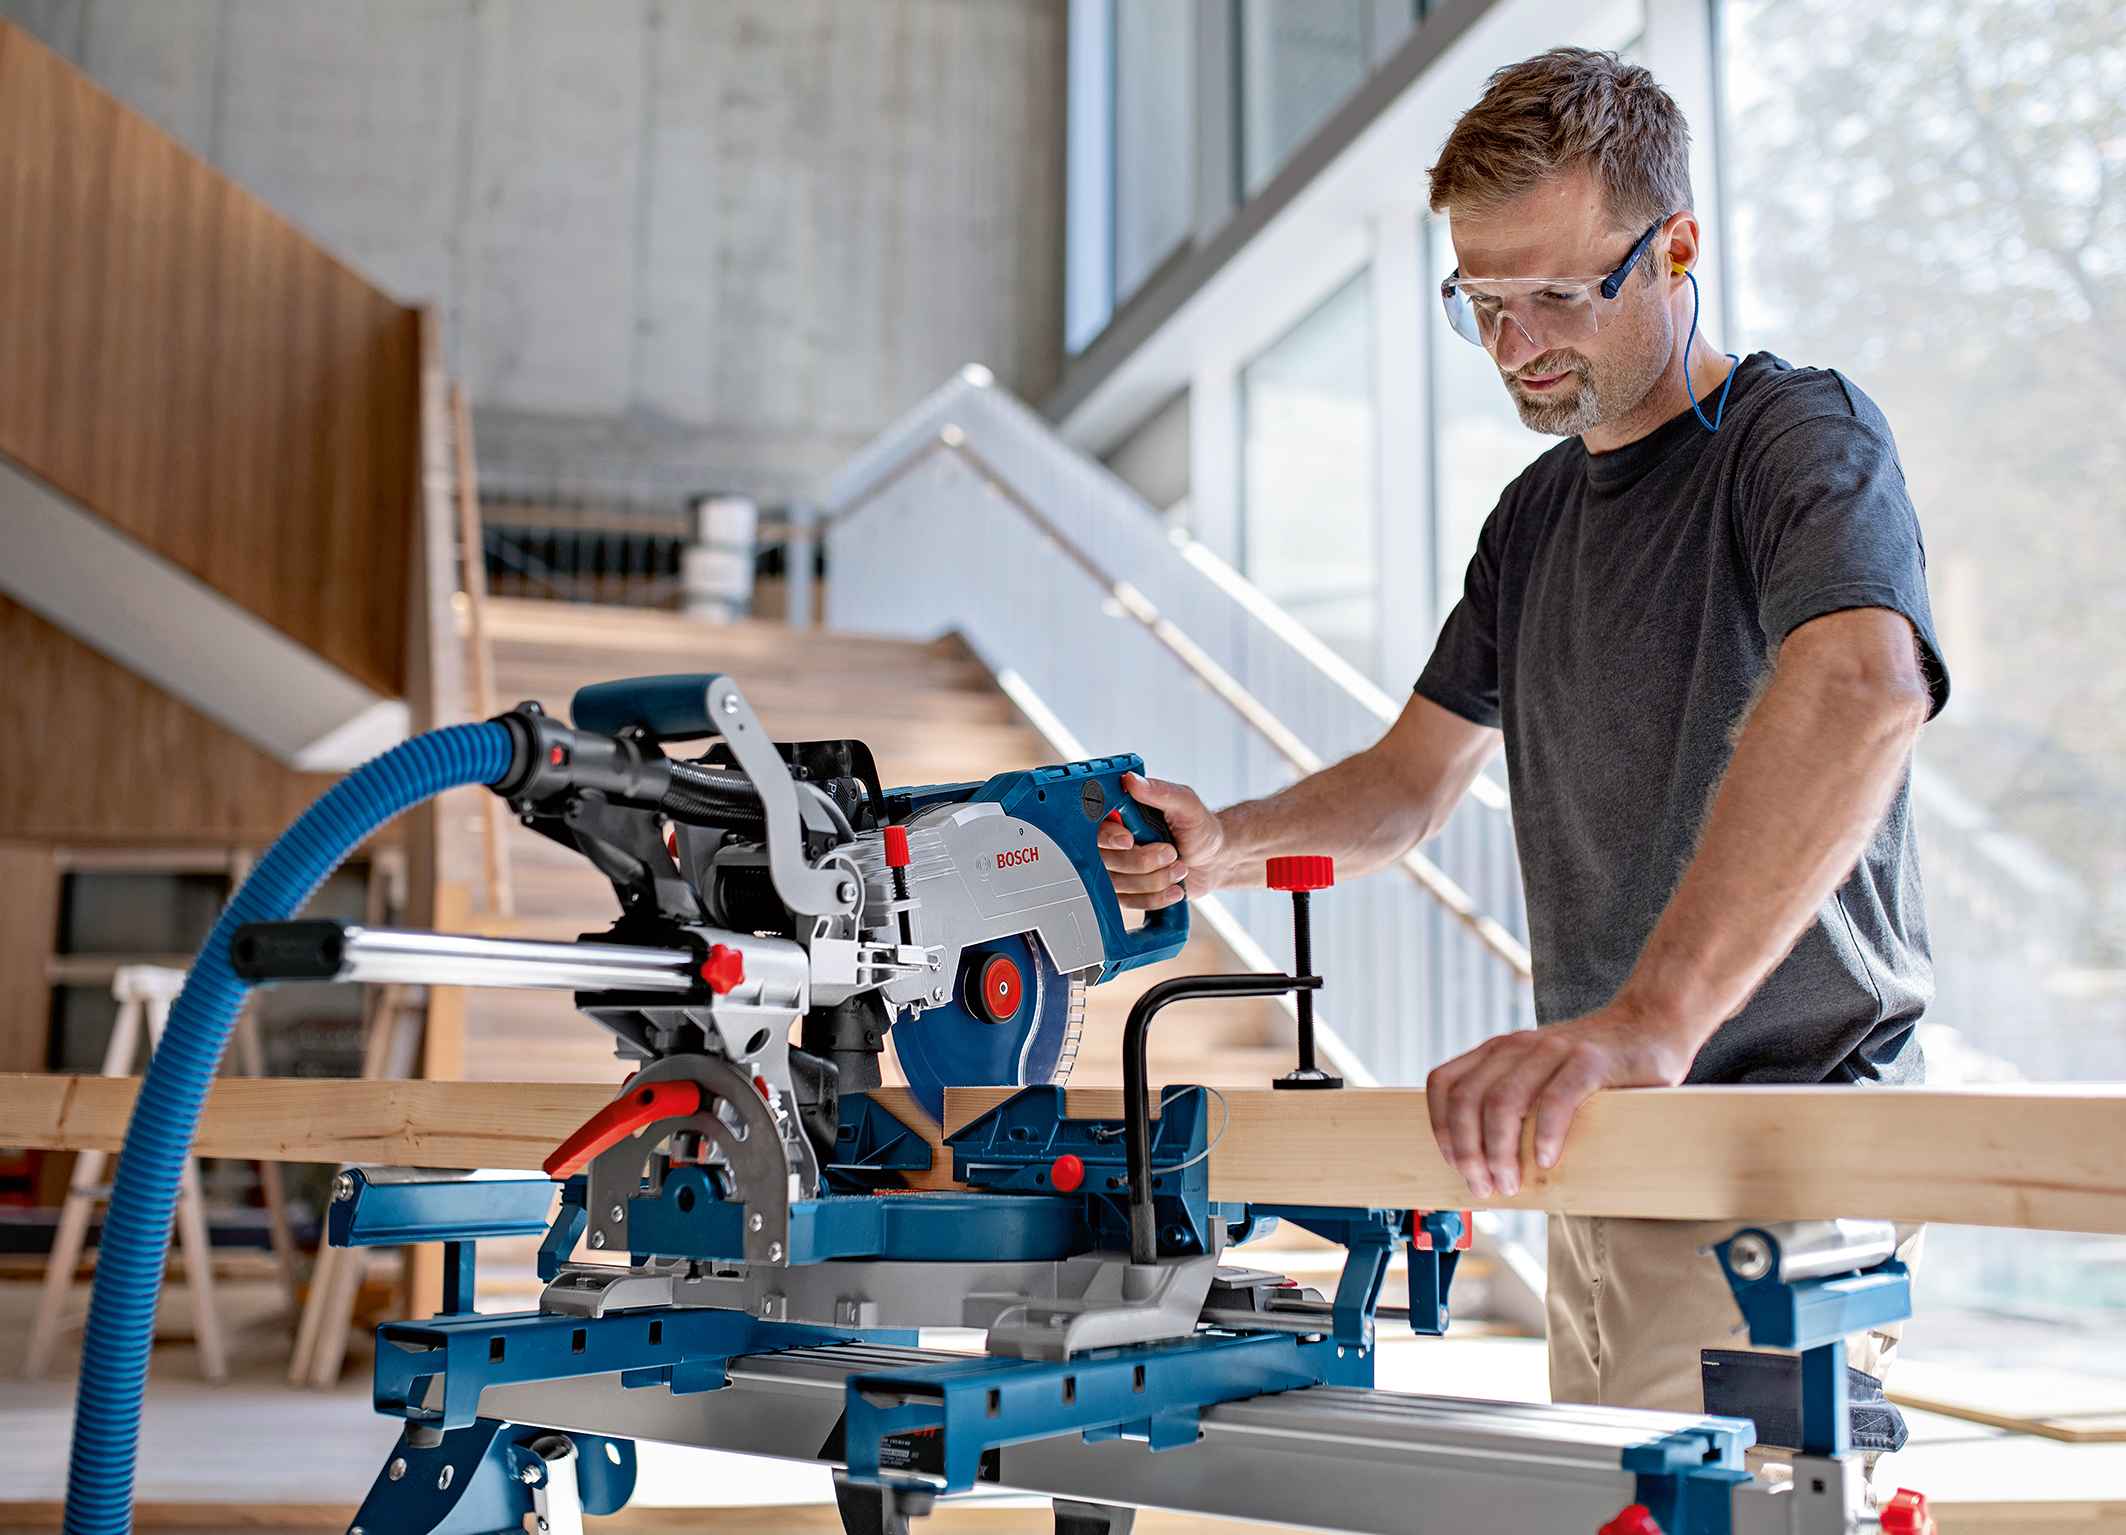 Superior number of cuts confirmed by an independent testing institute: Biturbo miter saw from Bosch for professionals